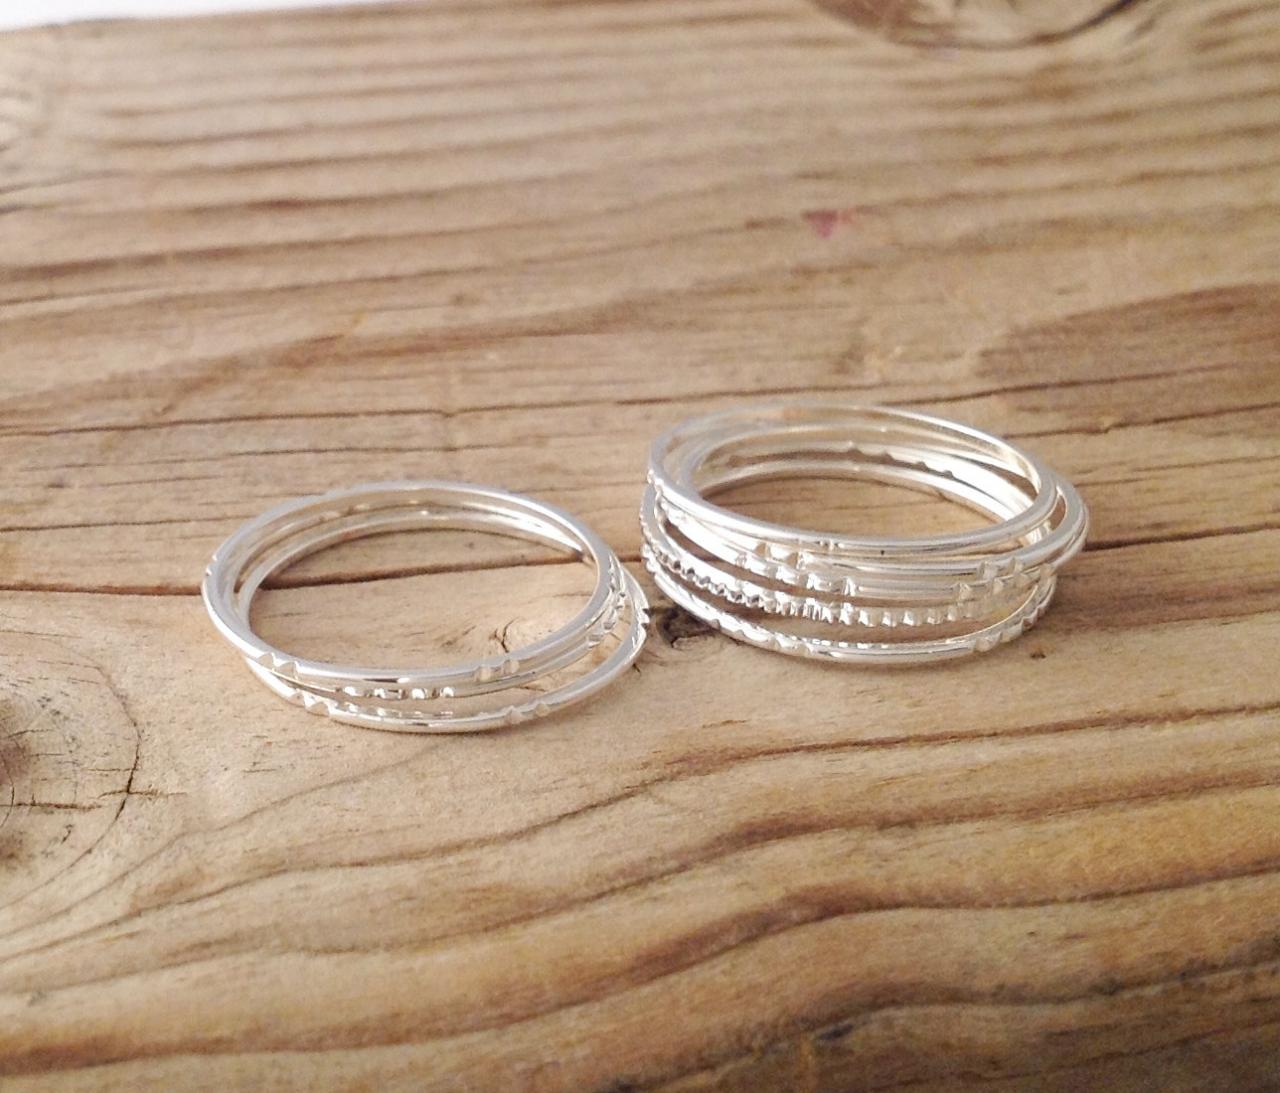 5 Gold rings, Stacking ring, silver rings, stacking gold rings, knuckle rings, thin ring, hammered ring, tiny ring 8881